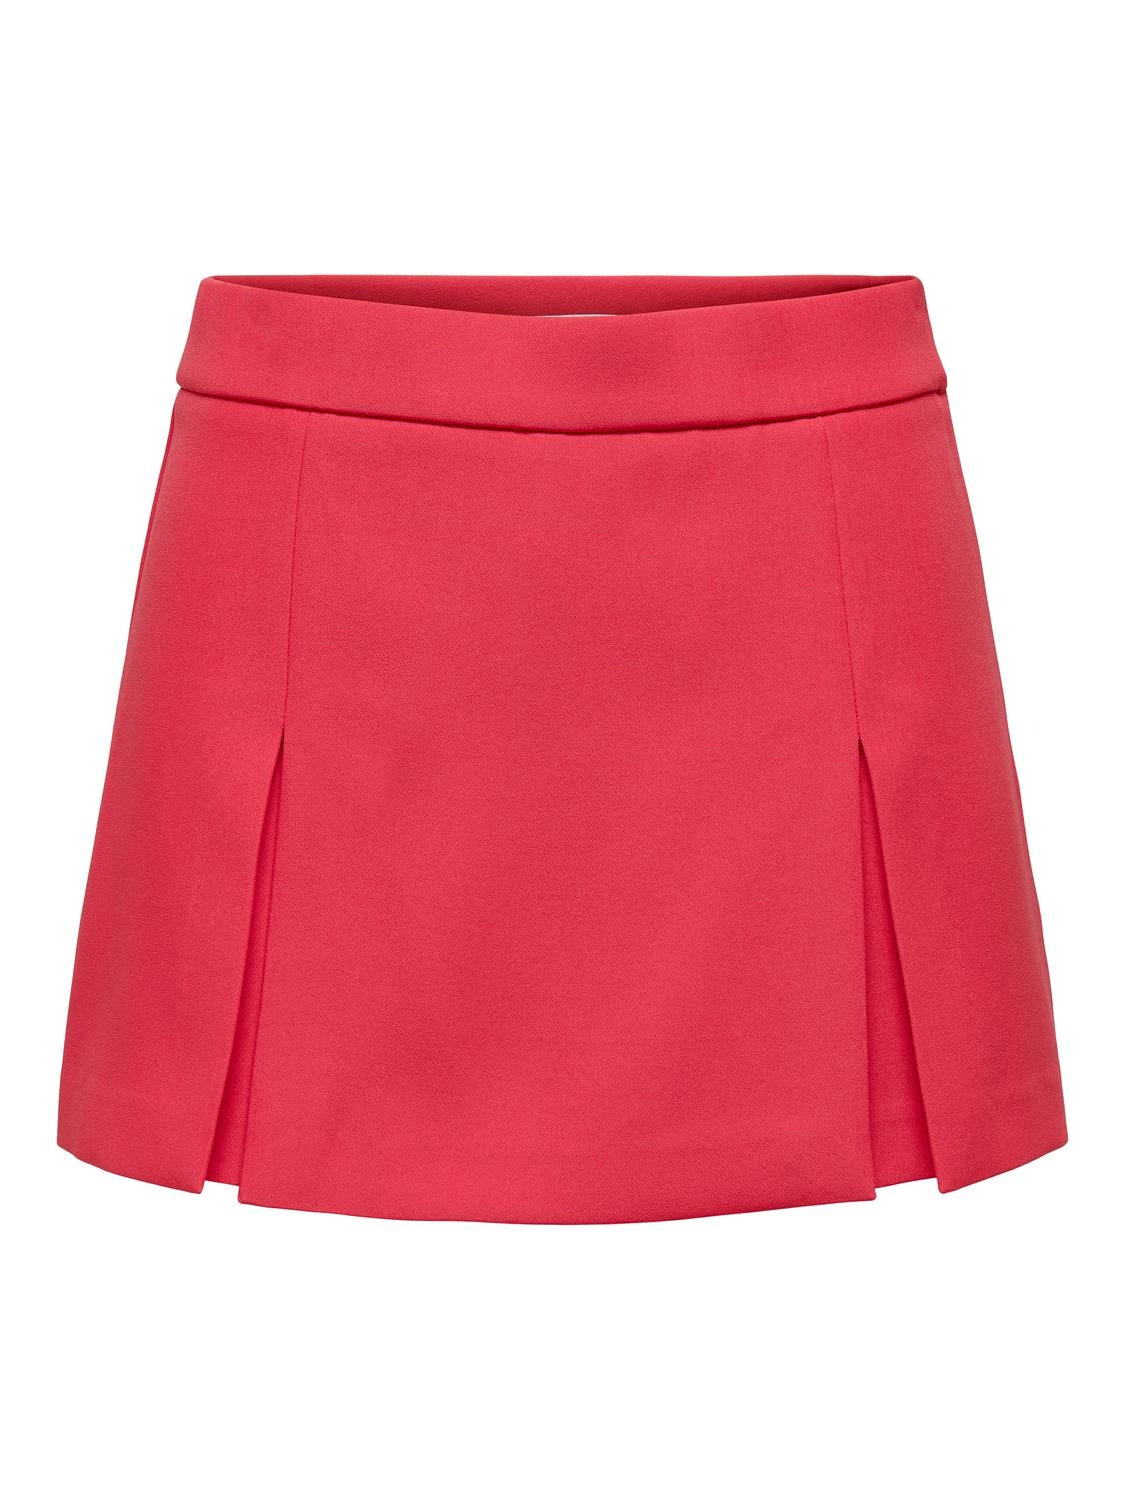 ONLY Mini skort with slit -Teaberry - 15295576